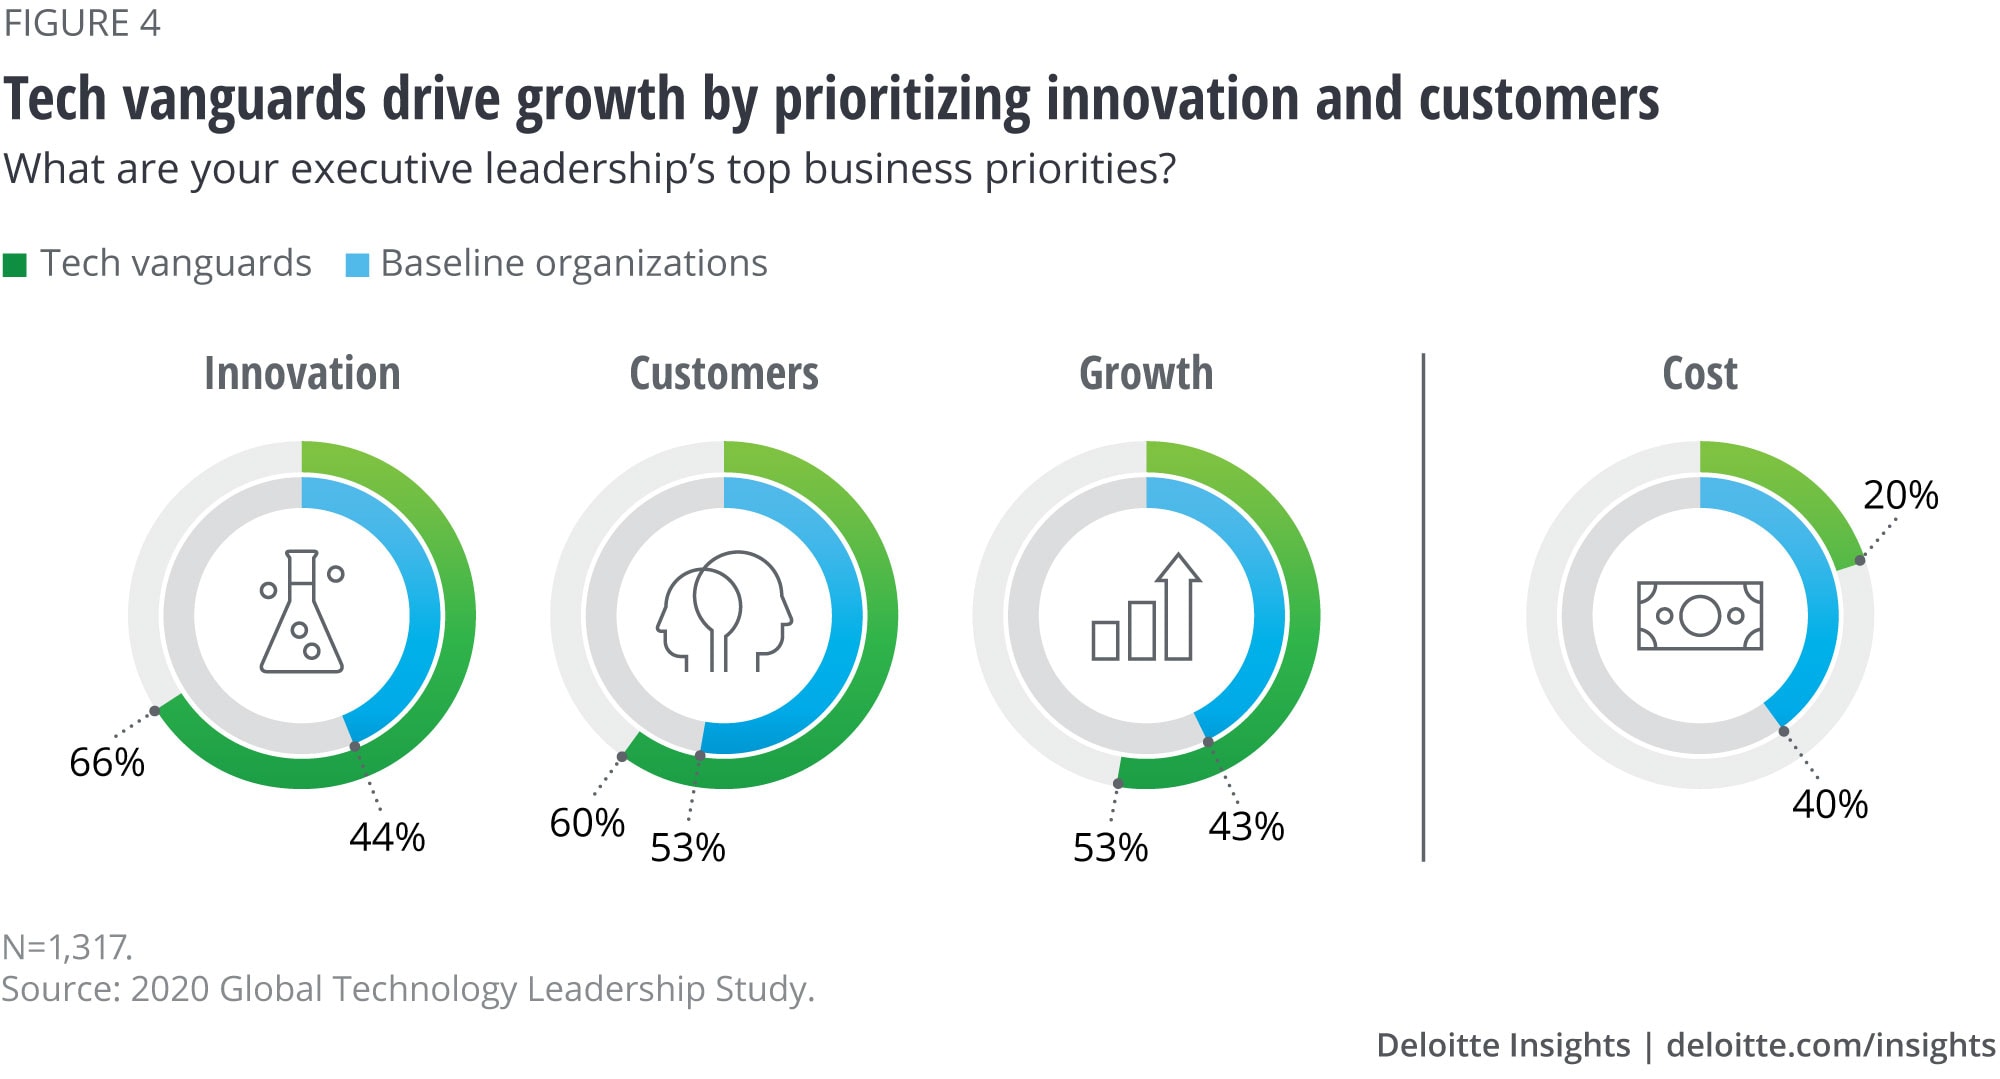 Tech vanguards drive growth by prioritizing innovation and customers